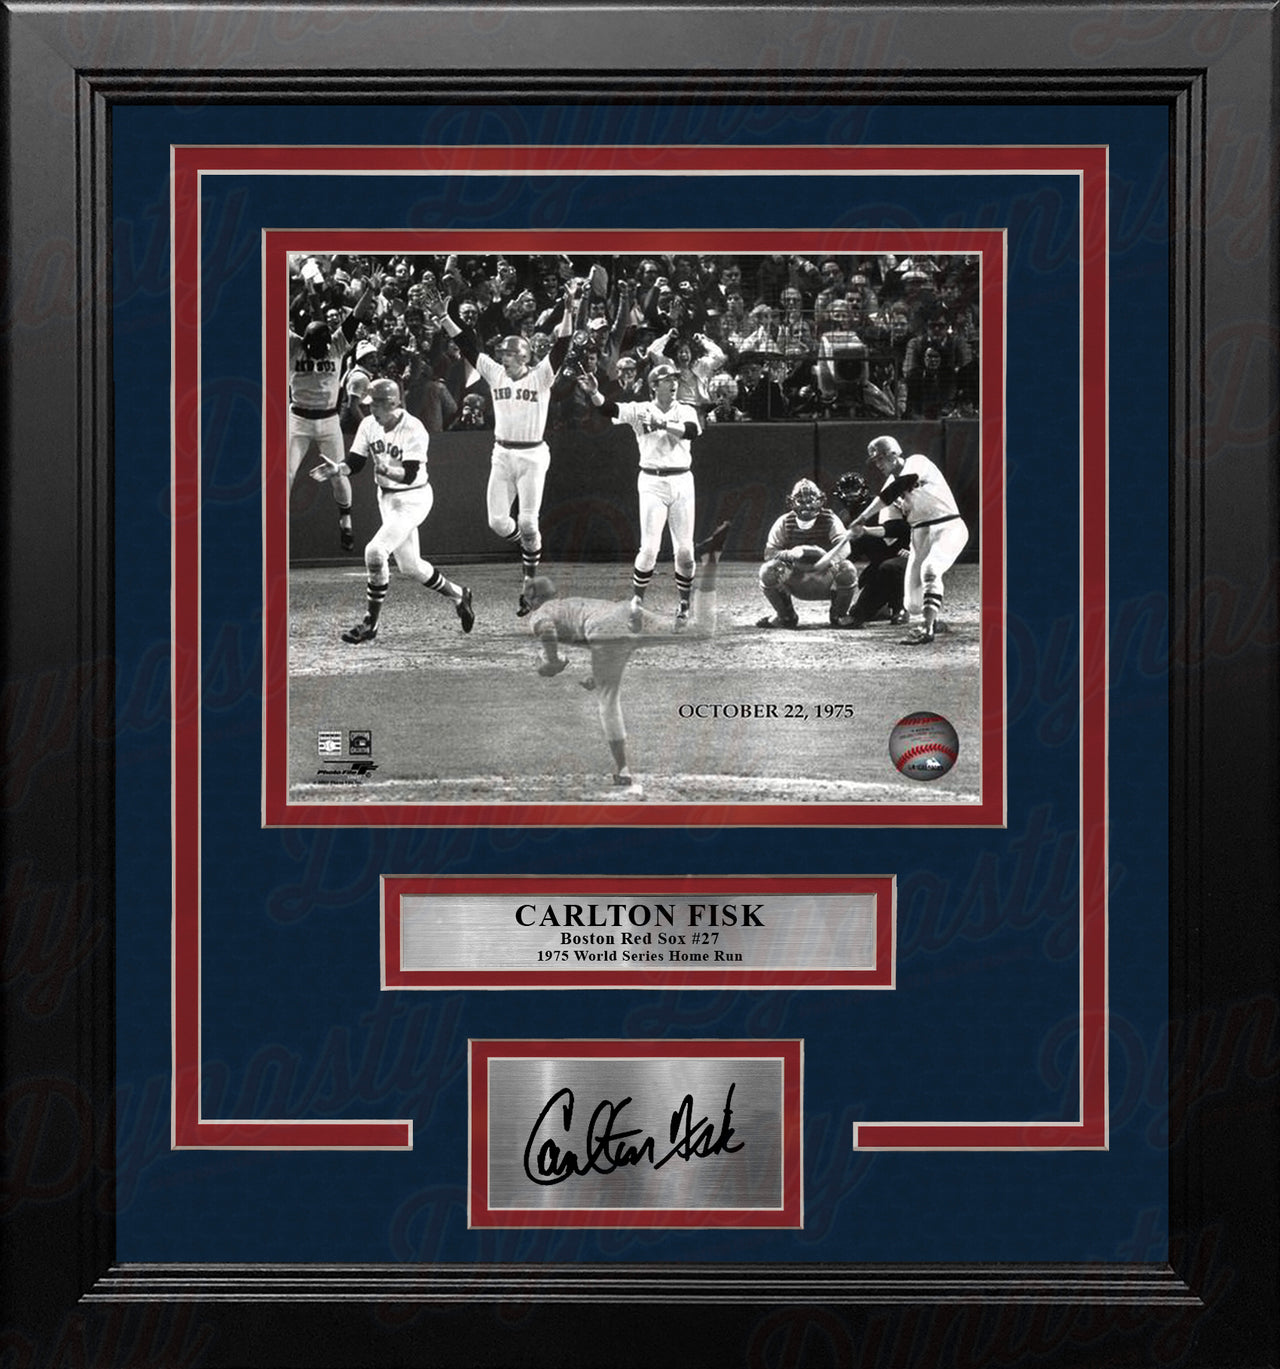 Carlton Risk World Series Home Run Boston Red Sox 8x10 Framed Baseball Photo with Engraved Autograph - Dynasty Sports & Framing 